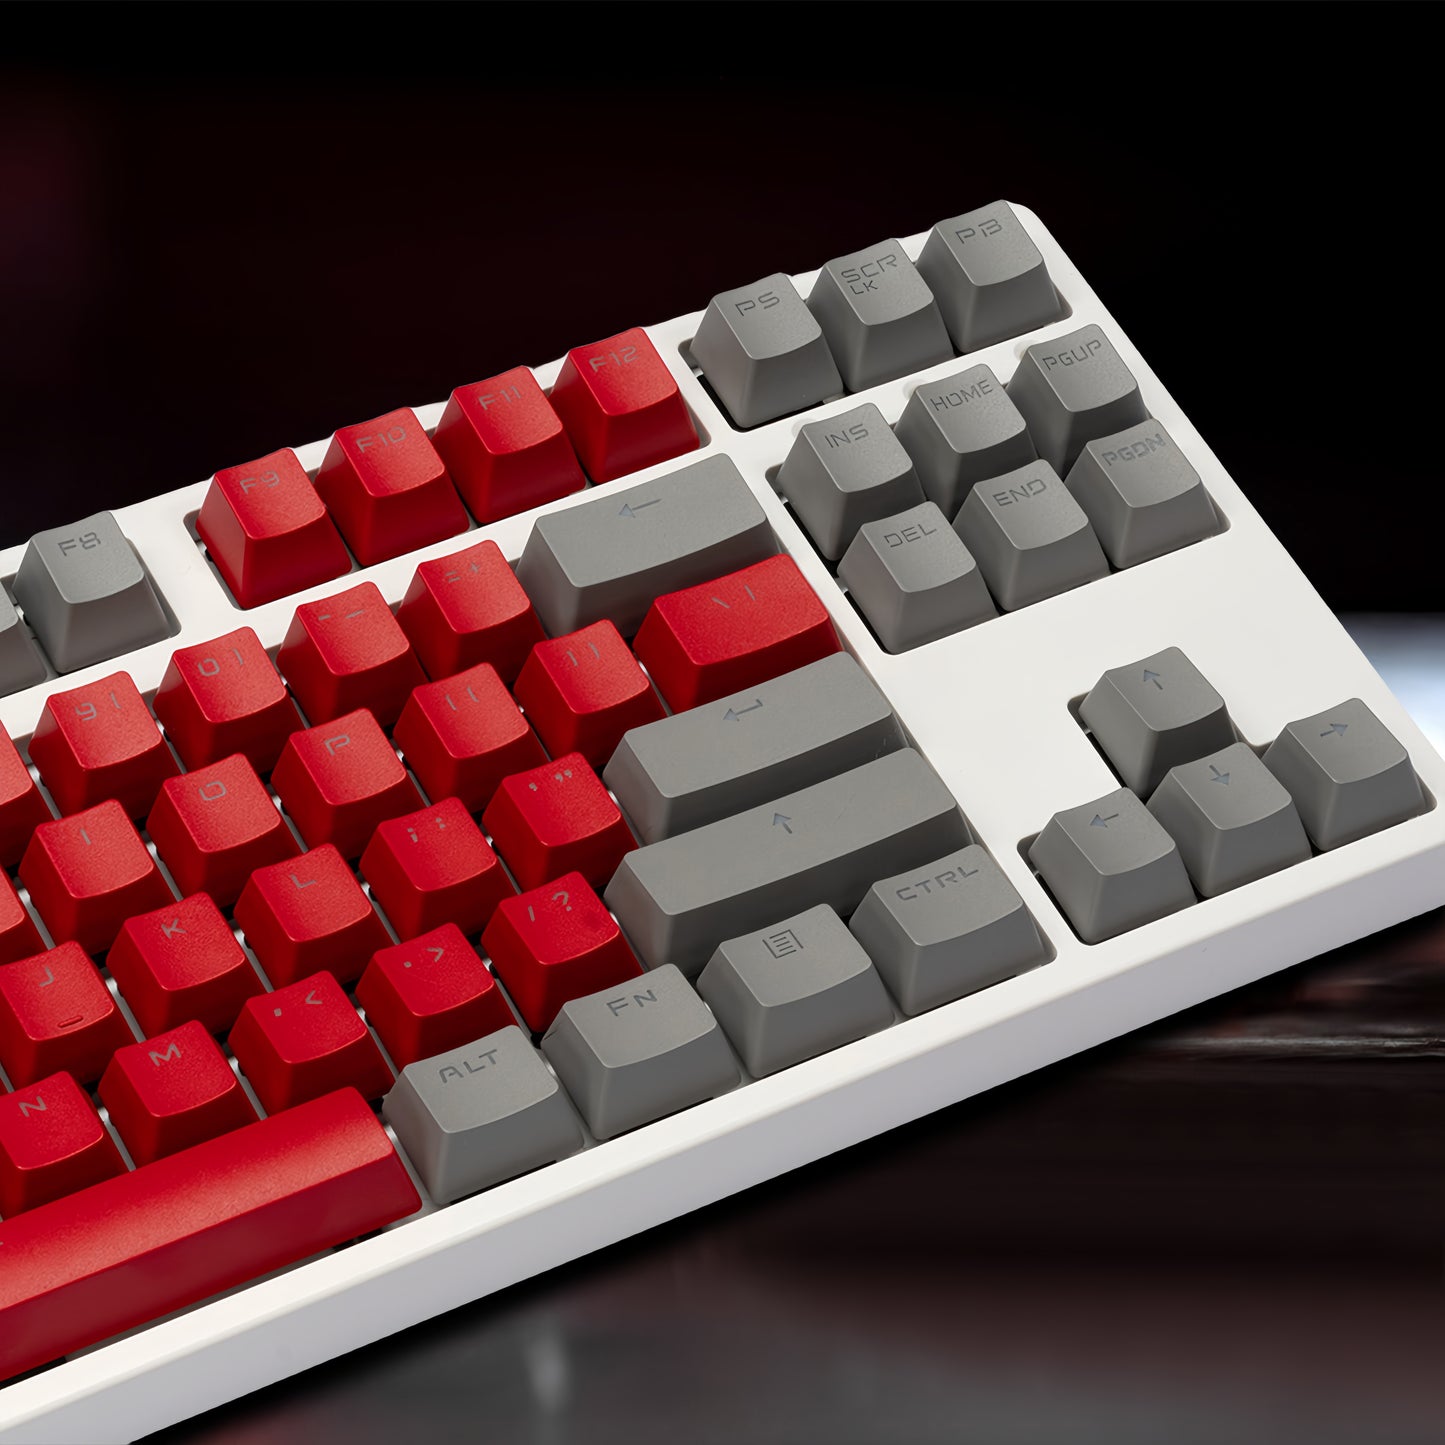 OEM PBT Dye-Sub Keycap PBT Keycap  Set - Red and gray dual color